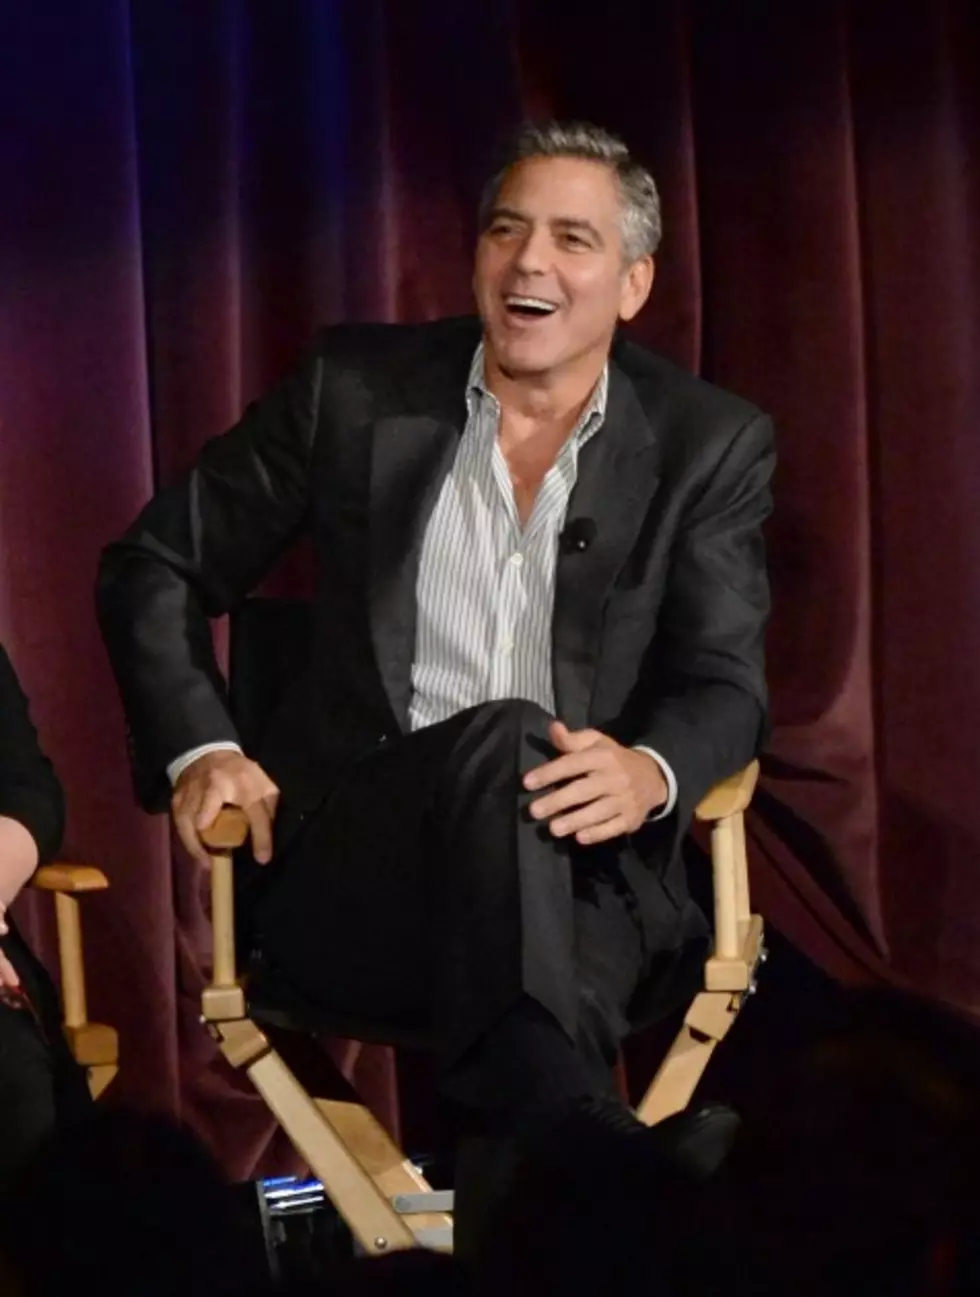 Win A Night Out With George Clooney!